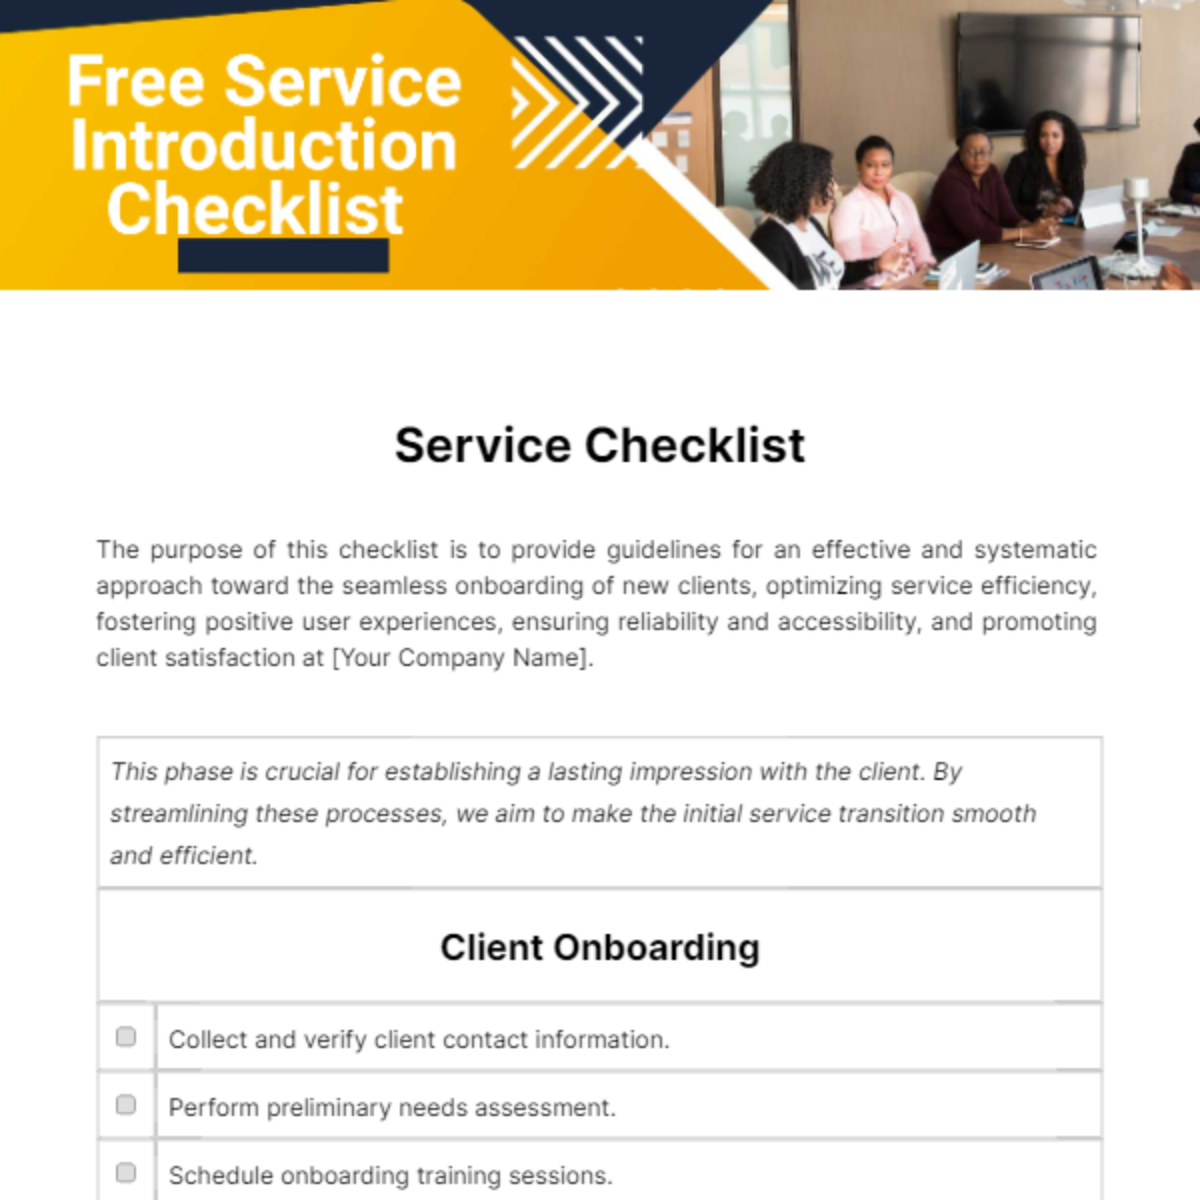 Free Service Introduction Checklist Template